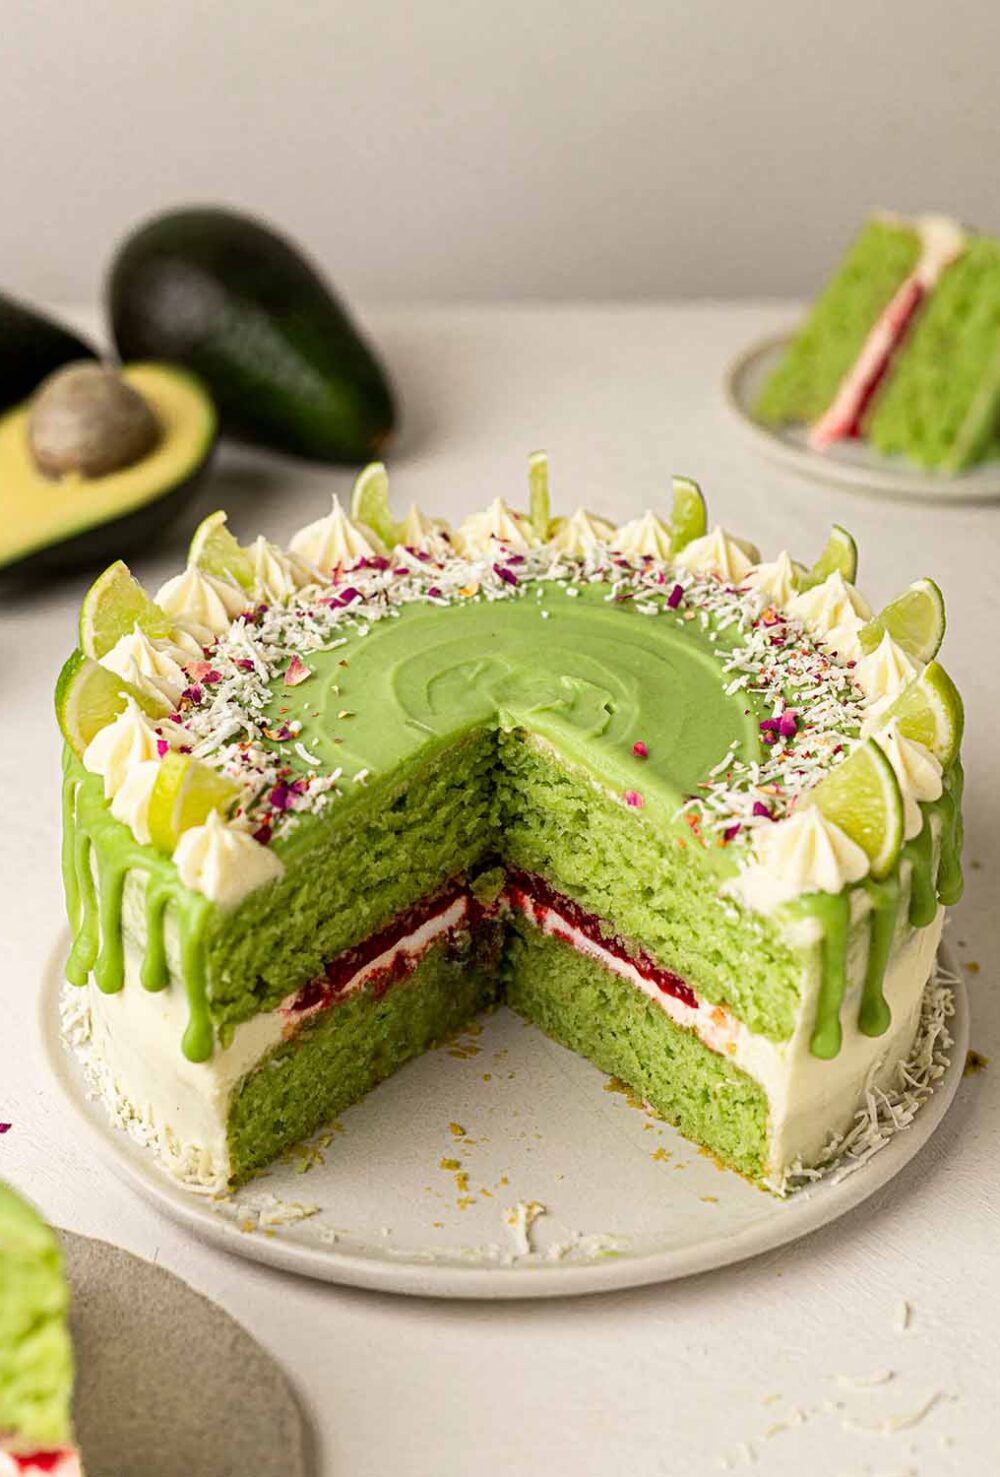 Cross section of light green colored cake with raspberry jam in middle. Cake is covered in green and white icing.